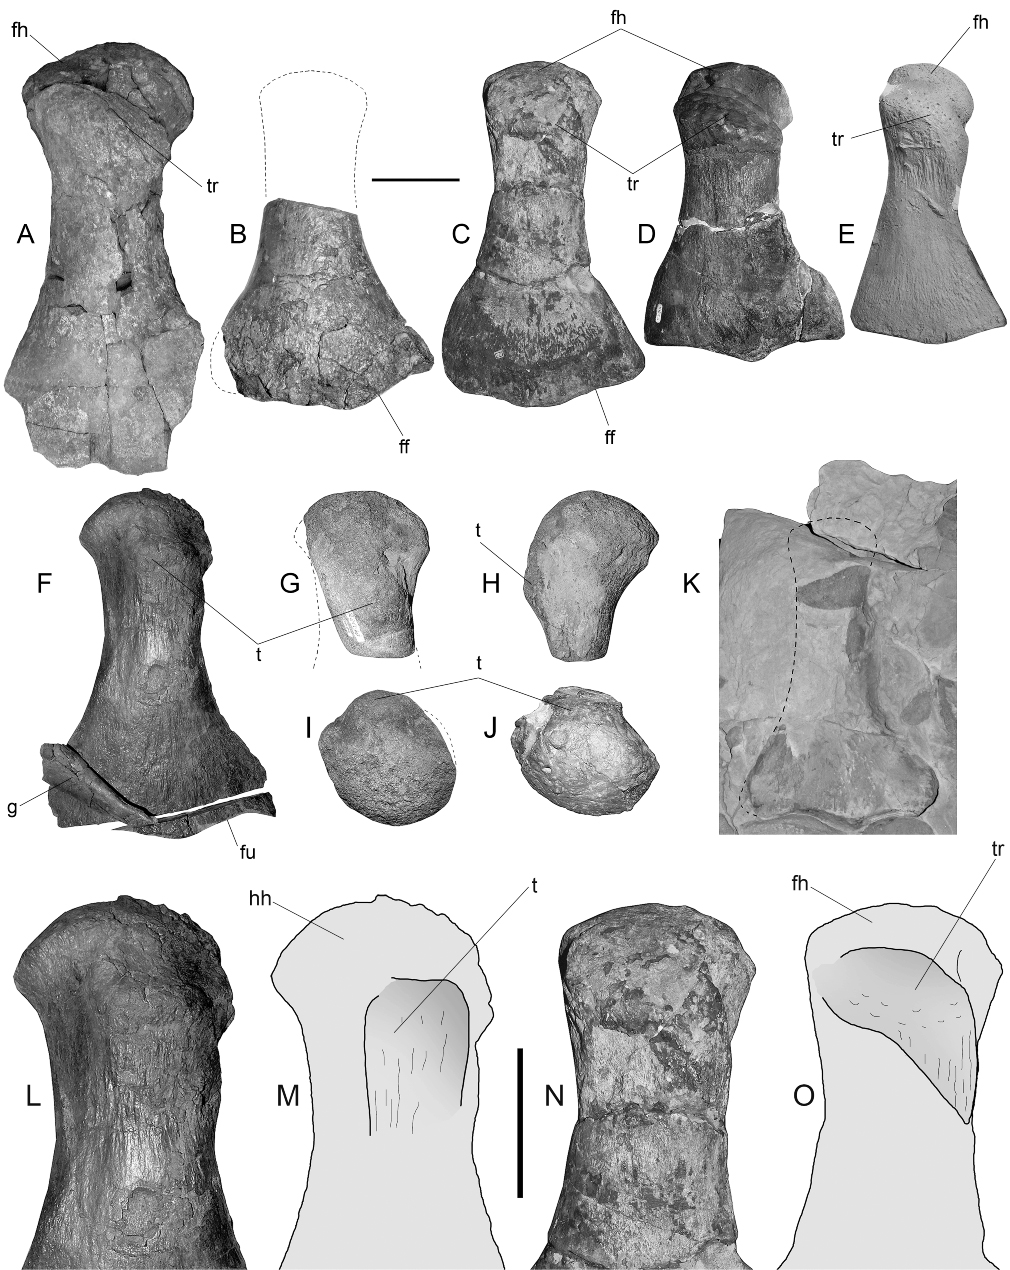 Figure 2 Comparison of different propodials among aristonectines. A, MLP-89-III-3-1, Aristonectes sp., right femur in dorsal view, mirrored for better comparison. B, SGO.PV.957, holotype of Aristonectes quiriquinensis Otero et al., Citation2014a. Right femur in dorsal view, mirrored for better comparison. C, SGO.PV.135, Aristonectes quiriquinensis (referred), left femur in dorsal view. D, DM R1529, lectotype of Mauisaurus haasti Hector, 1874 designated by Welles (Citation1962). Right femur in dorsal view, mirrored for better comparison. E, OU 12649, holotype of Kaiwhekea katiki Cruickshank & Fordyce, Citation2002. Left femur in dorsal view. F, SGO.PV.957, holotype of Aristonectes quiriquinensis. Left humerus in dorsal view. G, SGO.PV.169, Aristonectes quiriquinensis (referred). Proximal end of a left humerus in dorsal view. H, Same in posterior view. I, Proximal view. J, Left humerus of SGO.PV.957 in proximal view. K, OU 12649, holotype of Kaiwhekea katiki. Cast of the left humerus. L, SGO.PV.957, holotype of Aristonectes quiriquinensis. Detail of the articular head of the humerus. M, Outline of the previous, showing the position of the tuberosity. N, SGO.PV.135, Aristonectes quiriquinensis (referred). Detail of the articular head of the femur. O, Outline of the previous, showing the position of the trochanter. Dashed lines indicate absent portions. Scale bars equal 100 mm.